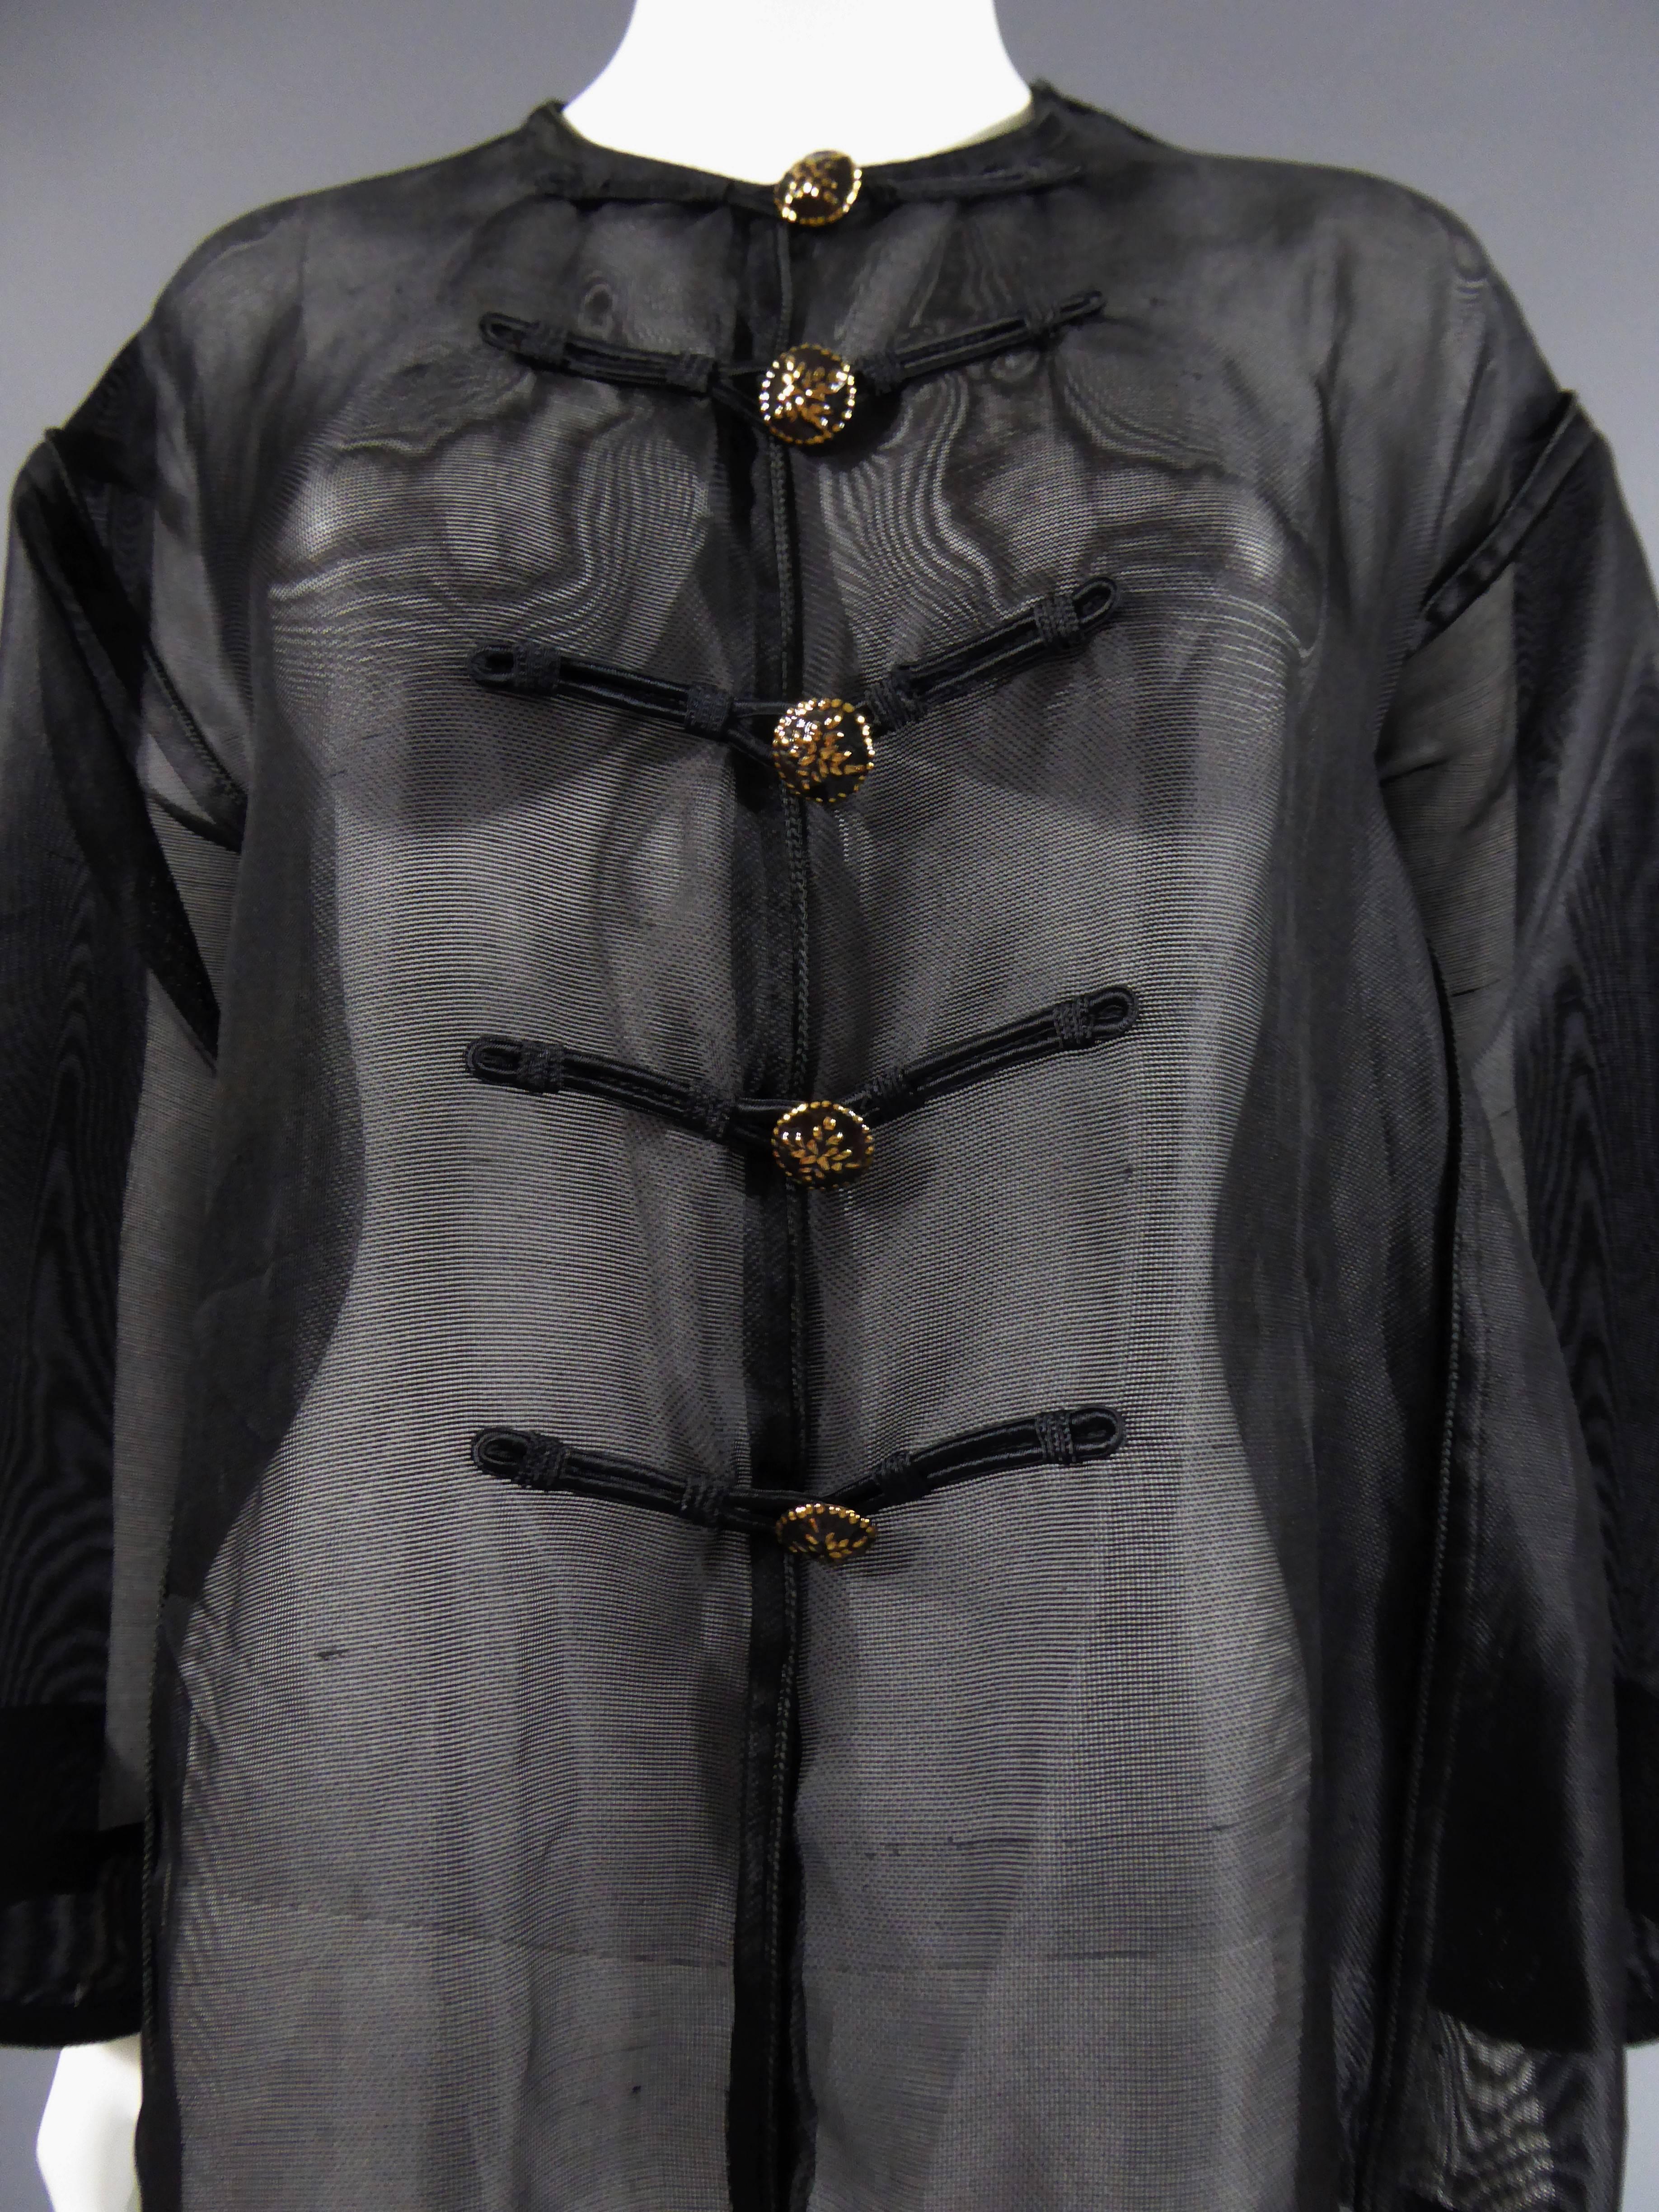 
Circa 1980

France

Black net nylon blouse with details of black and gold buttons and Chinese style trimmings. No size on it, but french Rive Gauche label. excellent condition and color, very clean.

Dimensions: Equivalent french size 38/40. Bottom